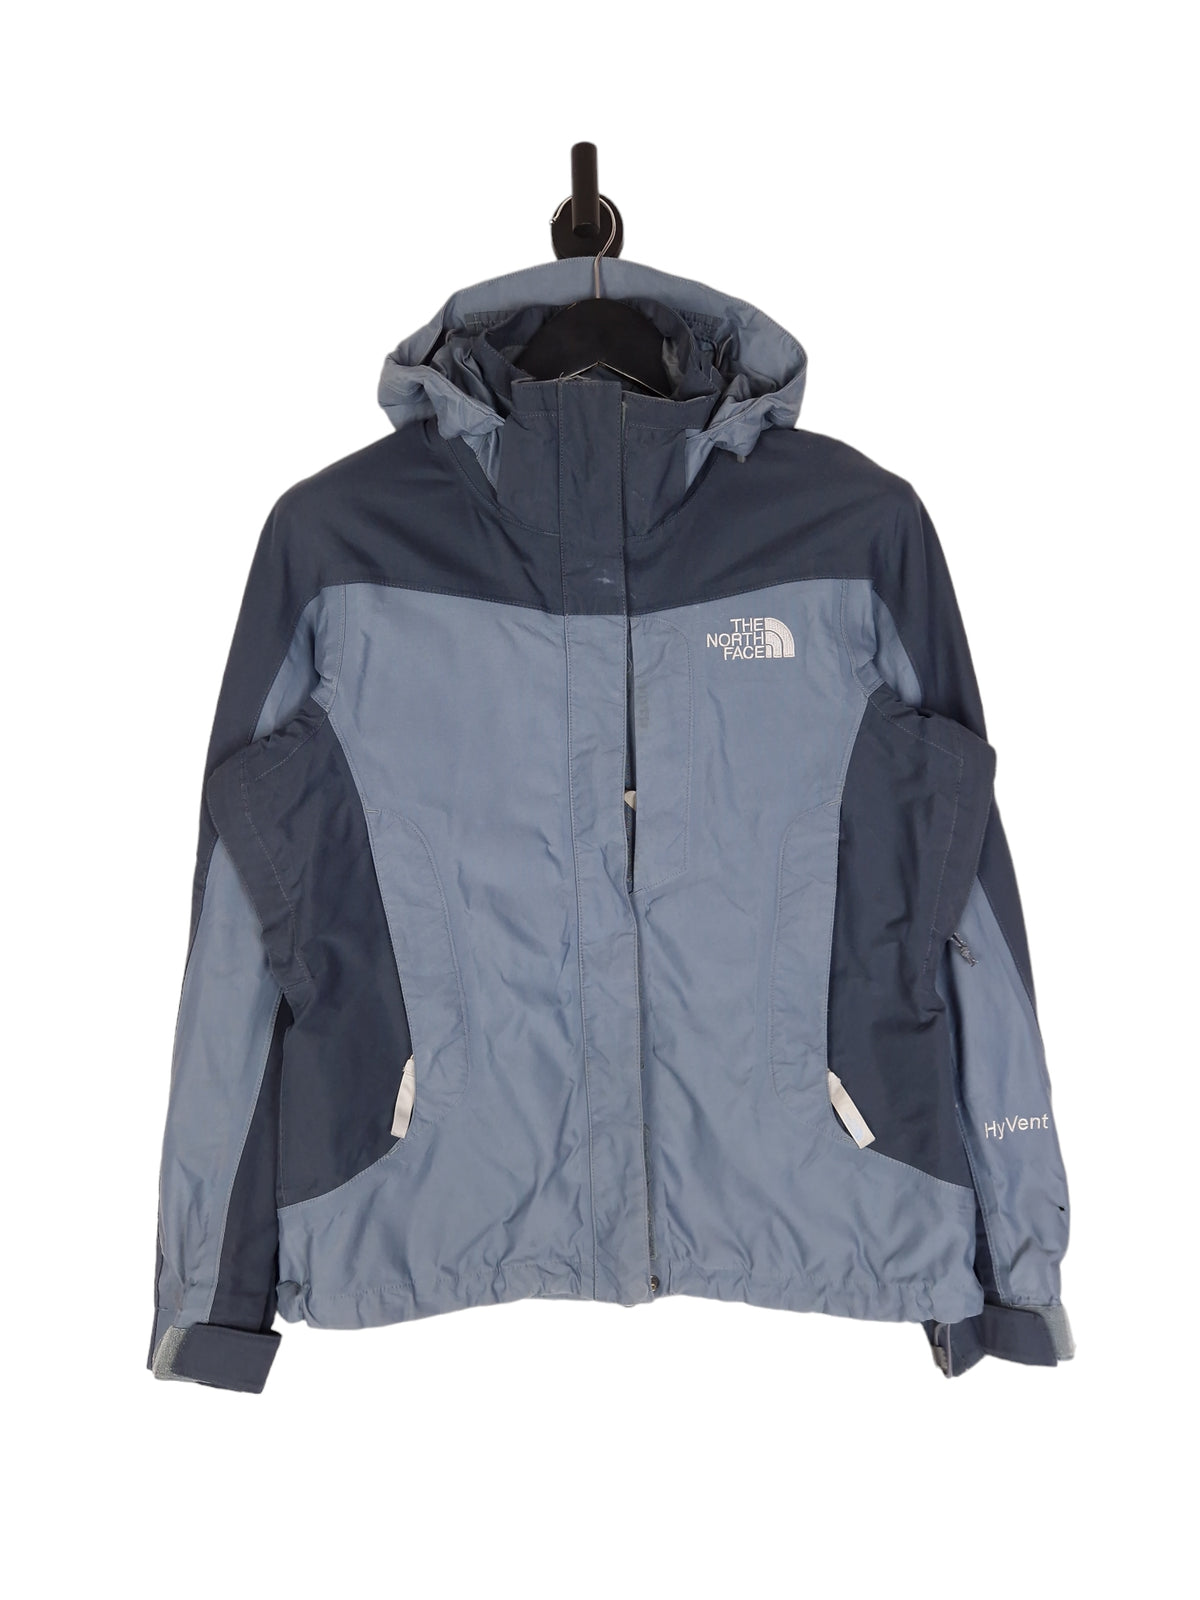 The North Face Hyvent  Jacket - Size UK 10